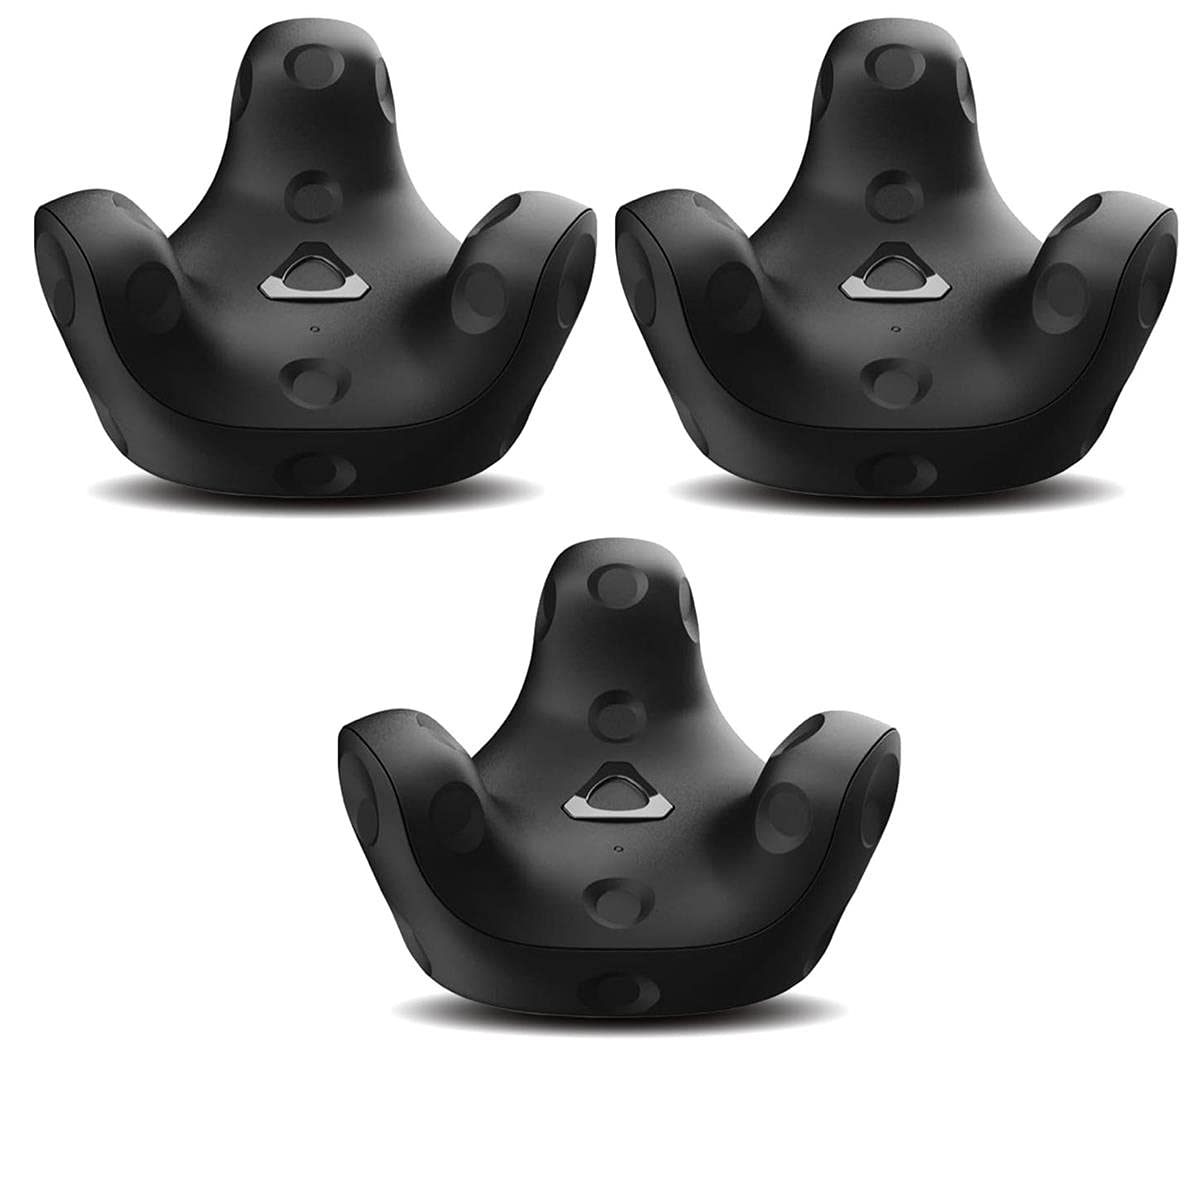 HTC 3 Pack Vive Tracker (3.0) for Smartphone